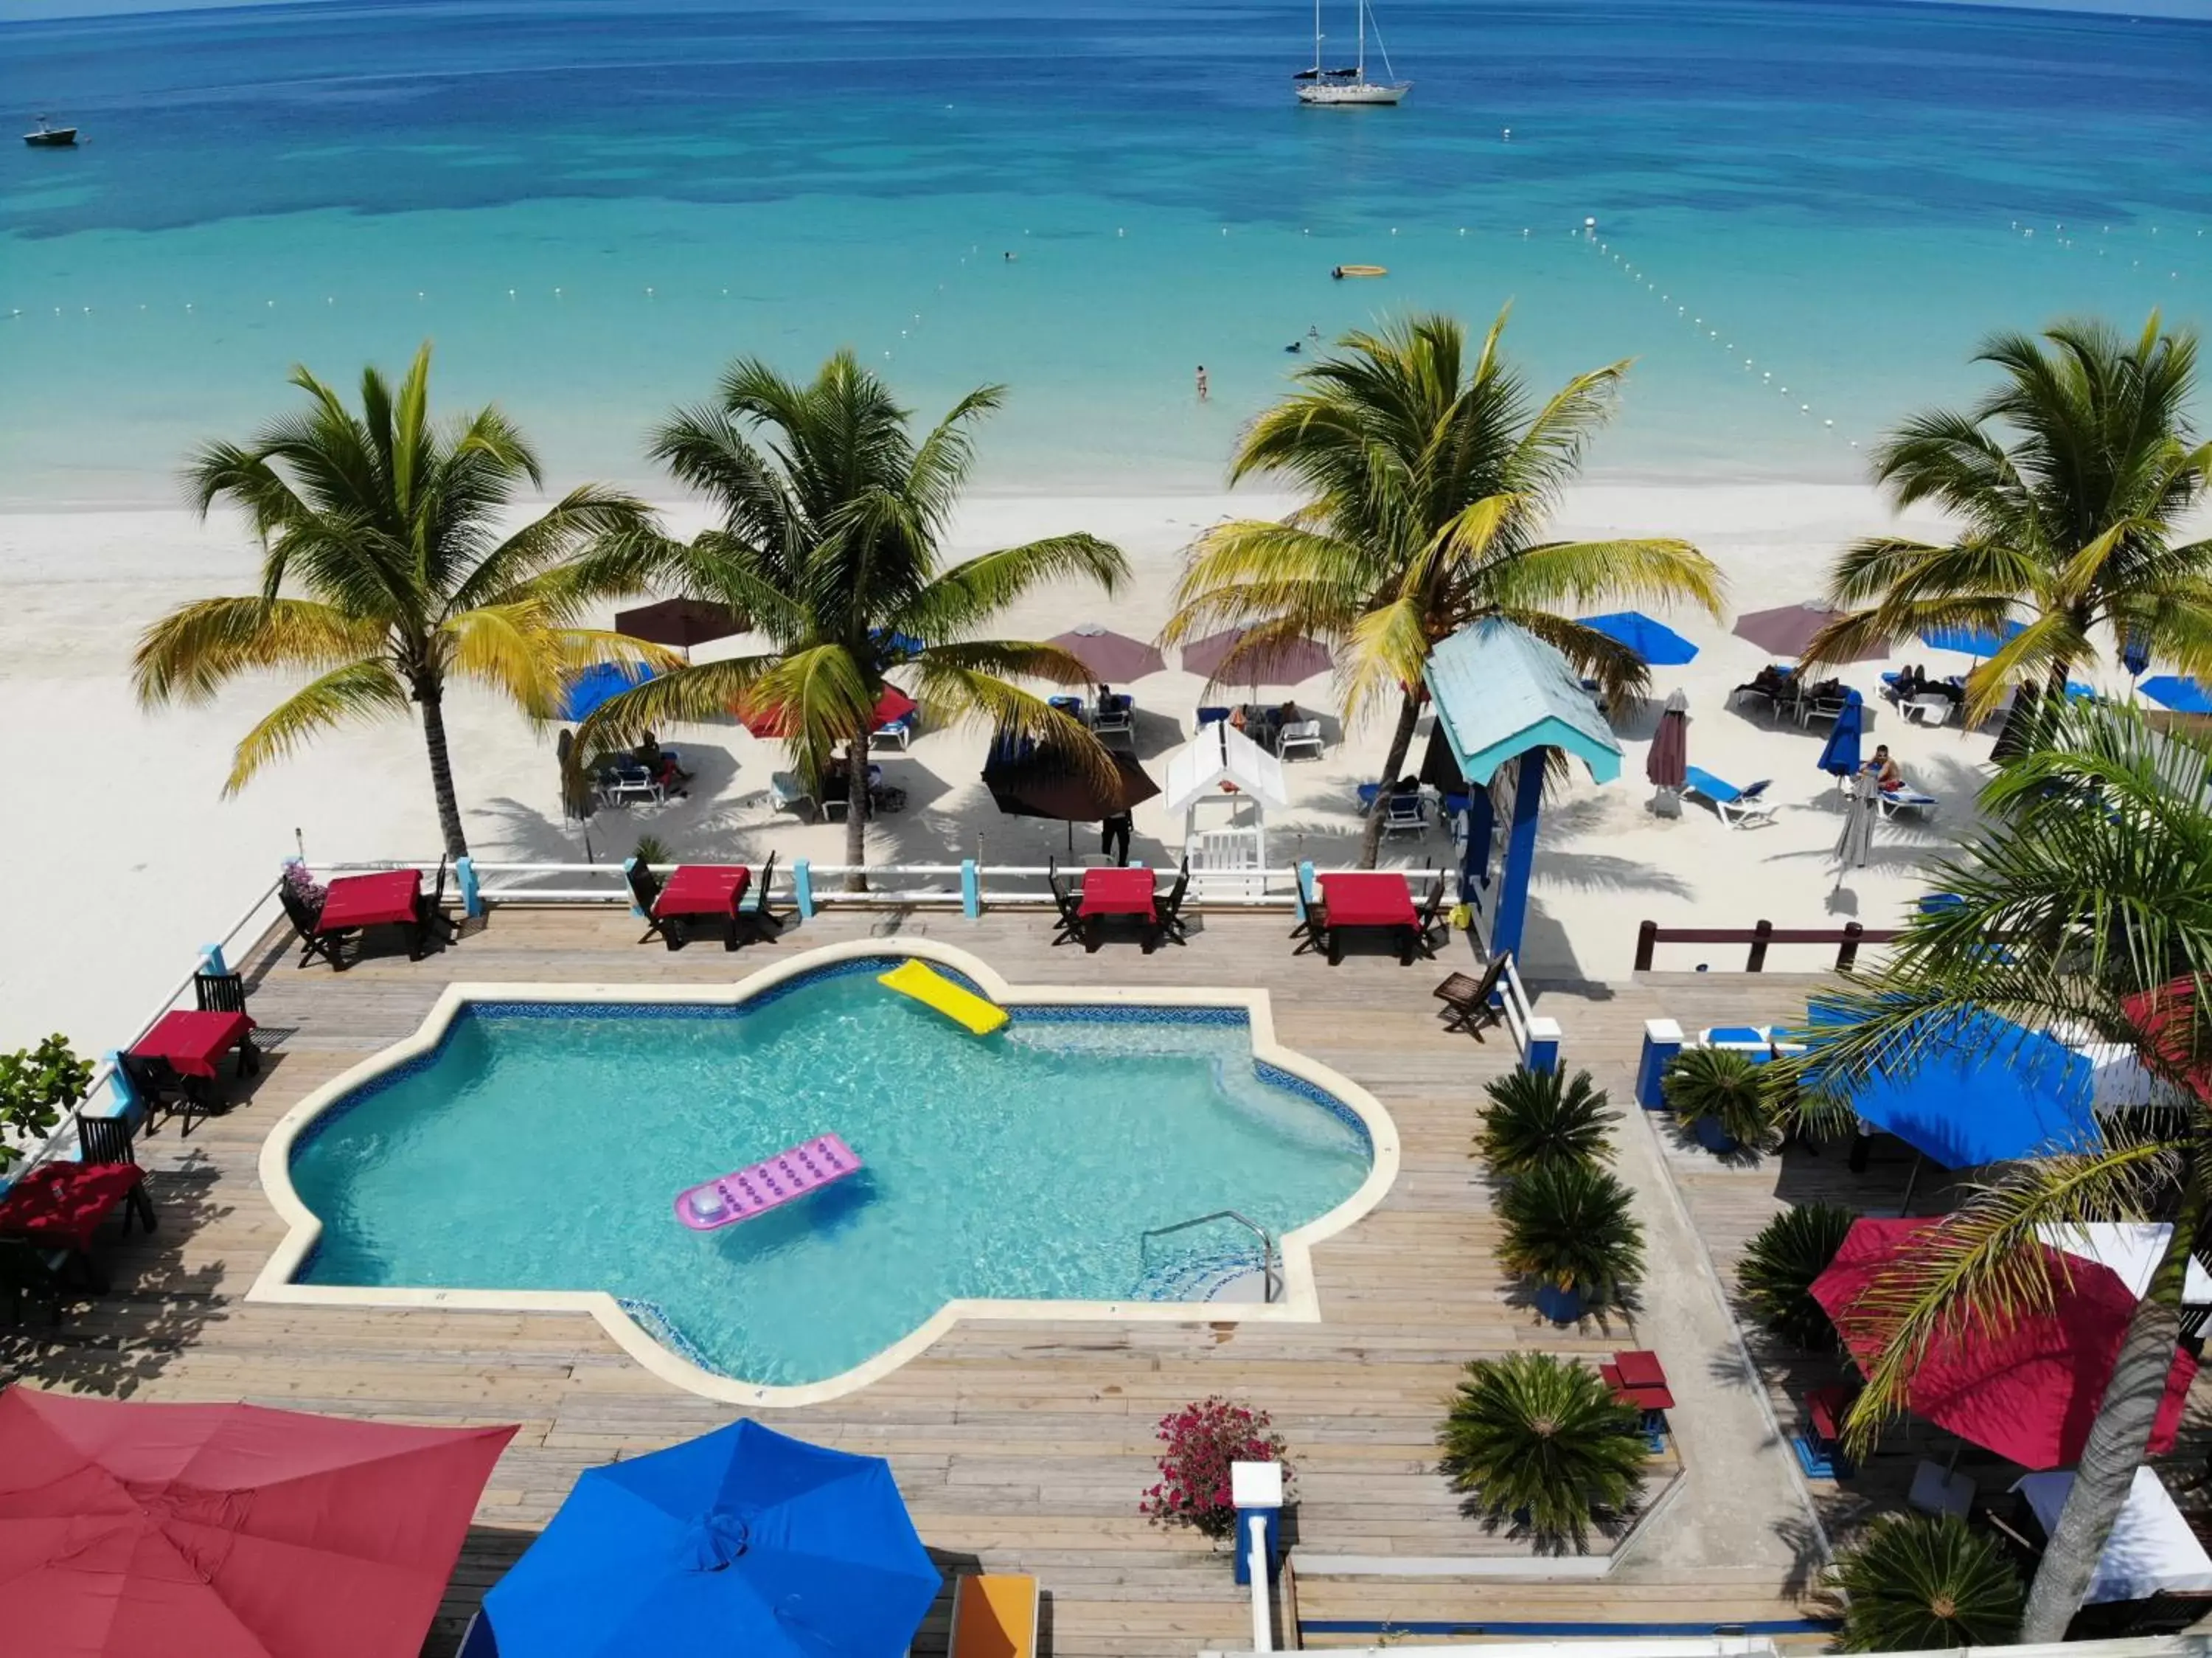 Swimming pool in Negril Palms